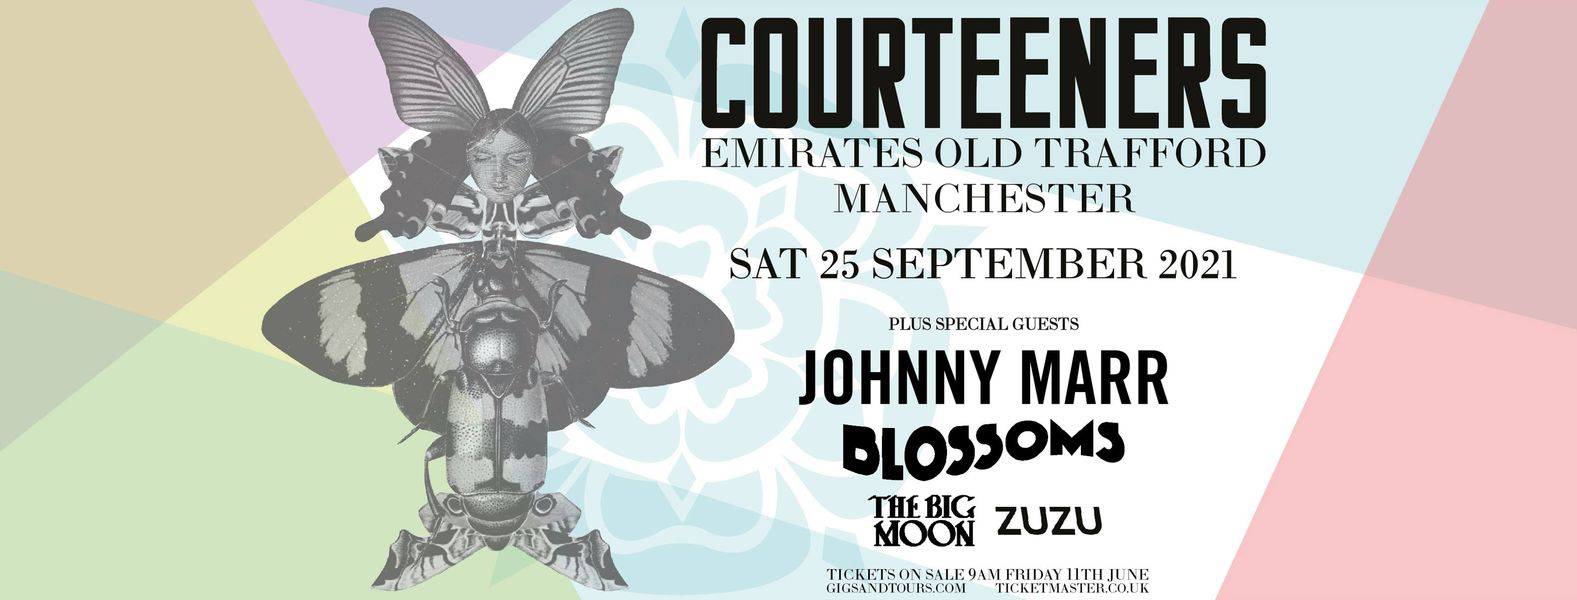 COURTEENERS announce headline show at Emirates Old Trafford, Manchester - Saturday 25th September 2021 